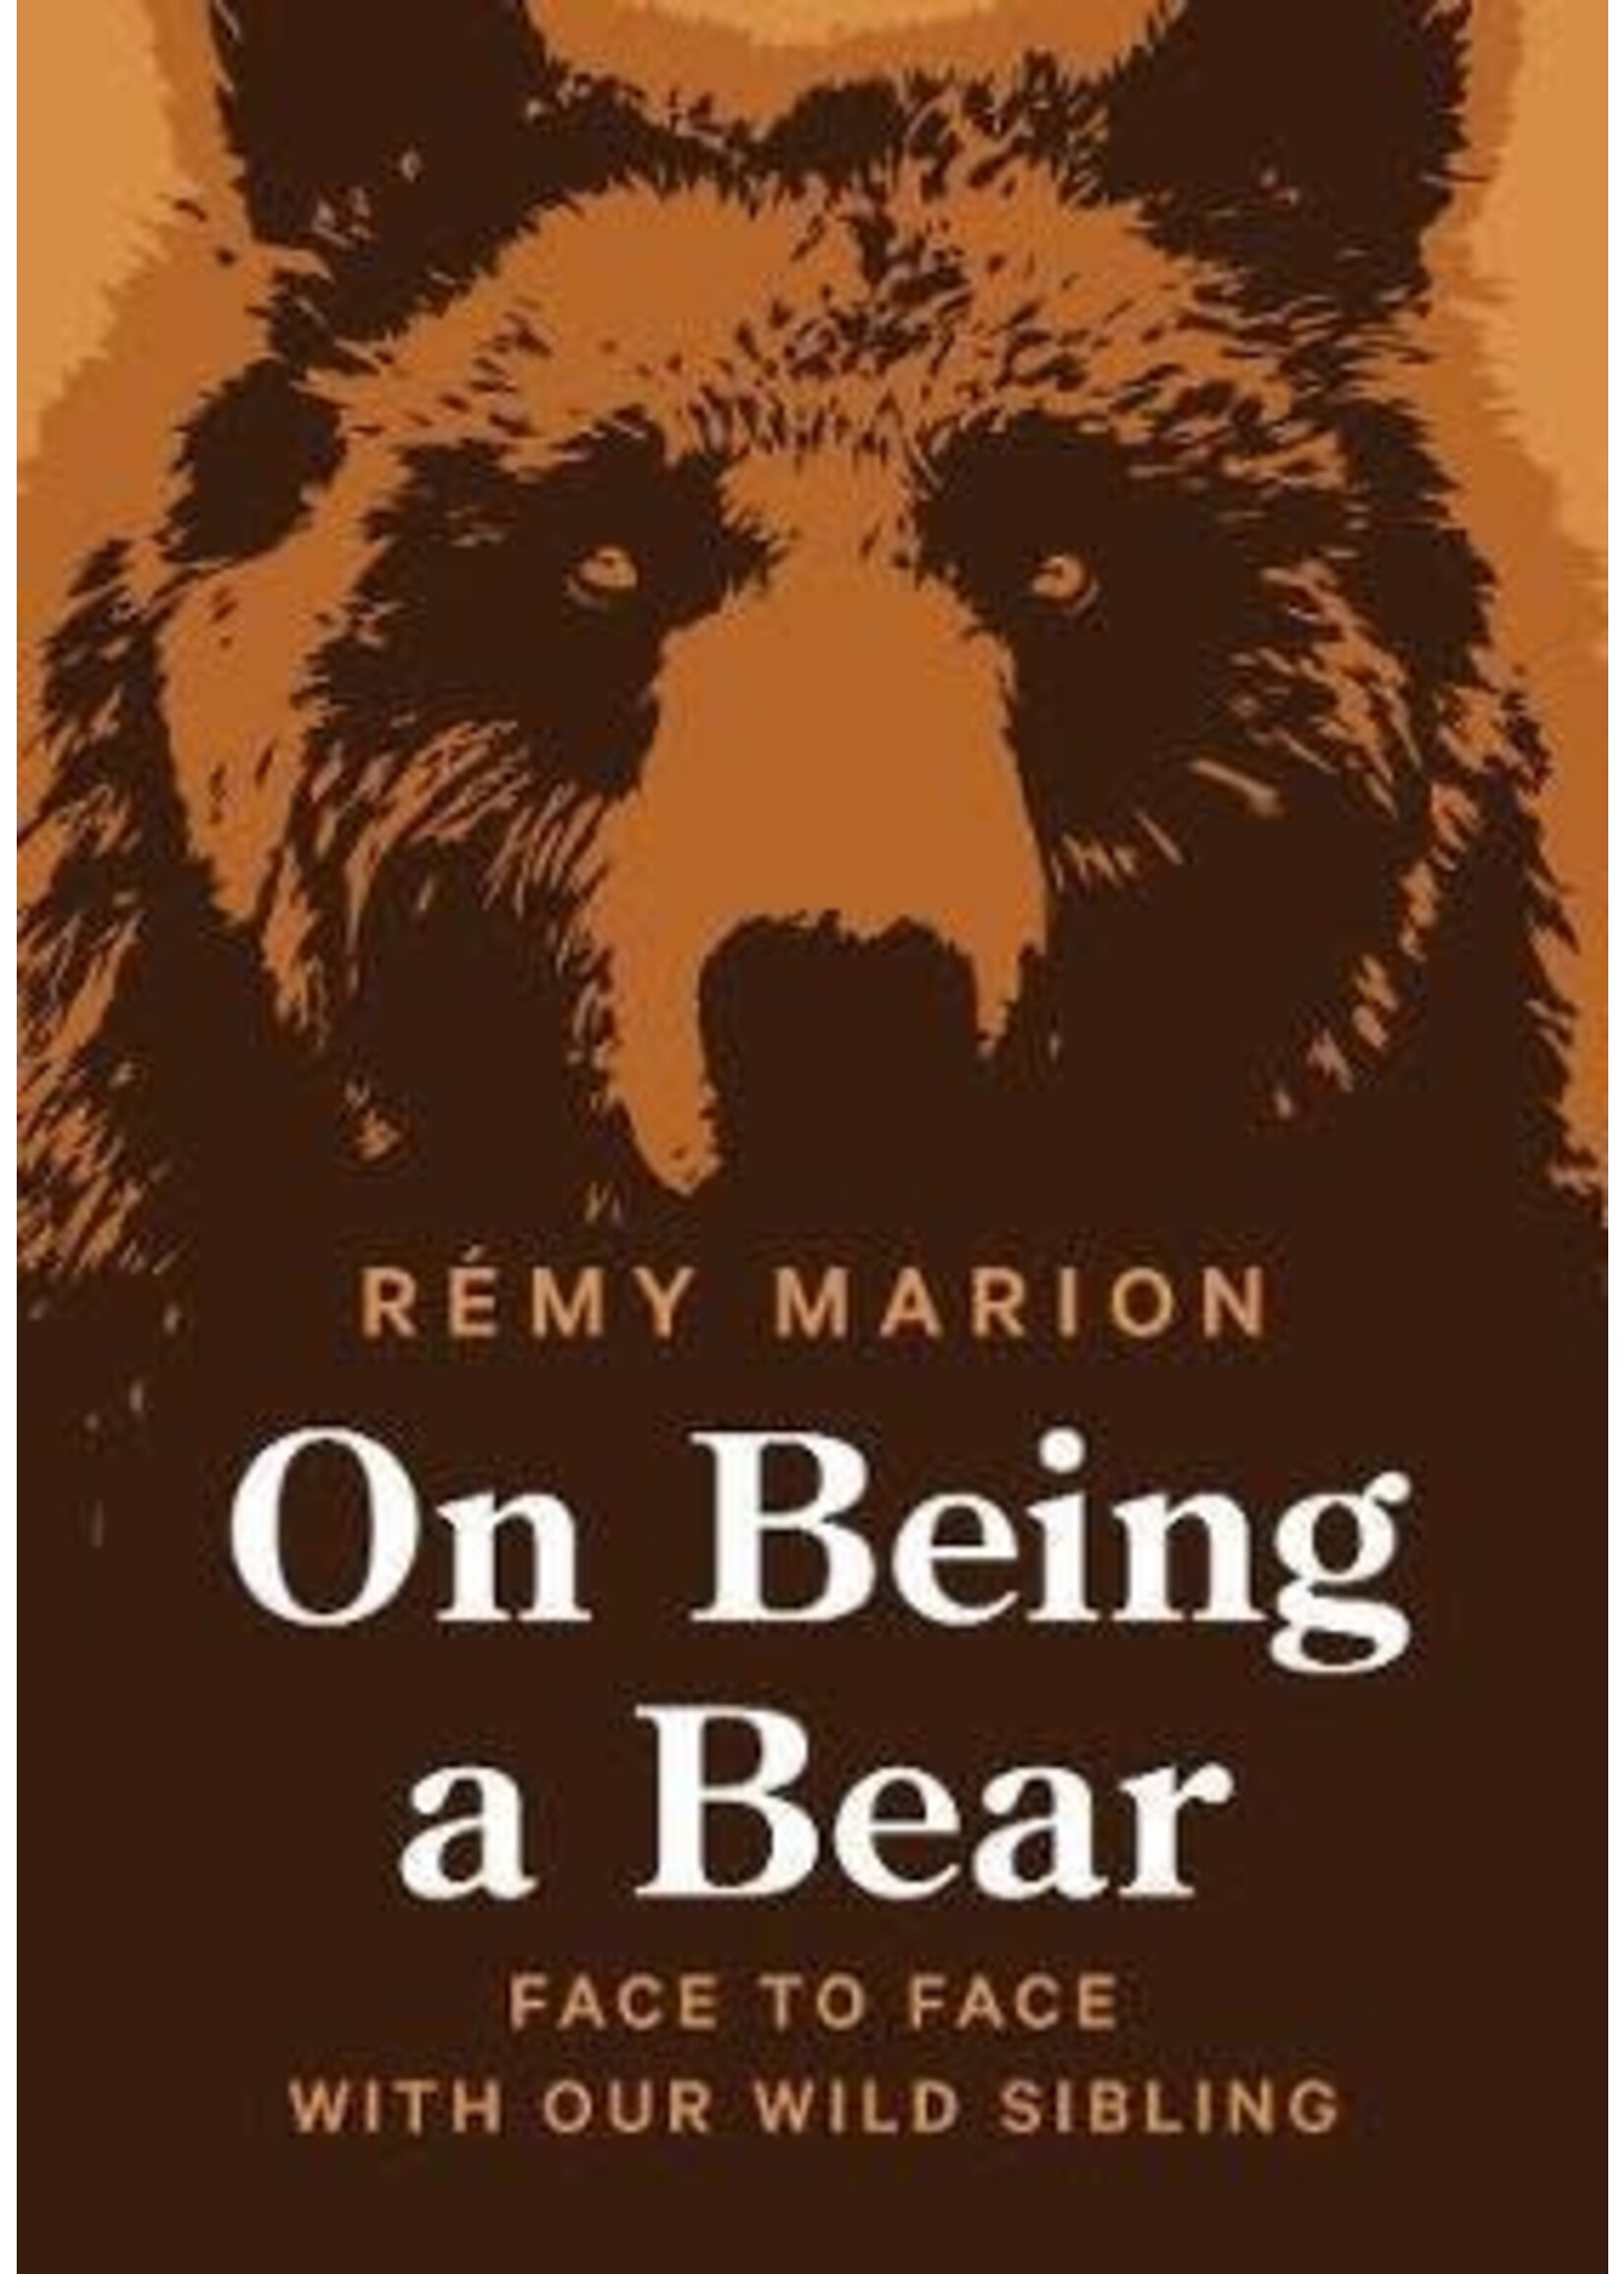 On Being a Bear: Face to Face with Our wild Sibling by Rémy Marion